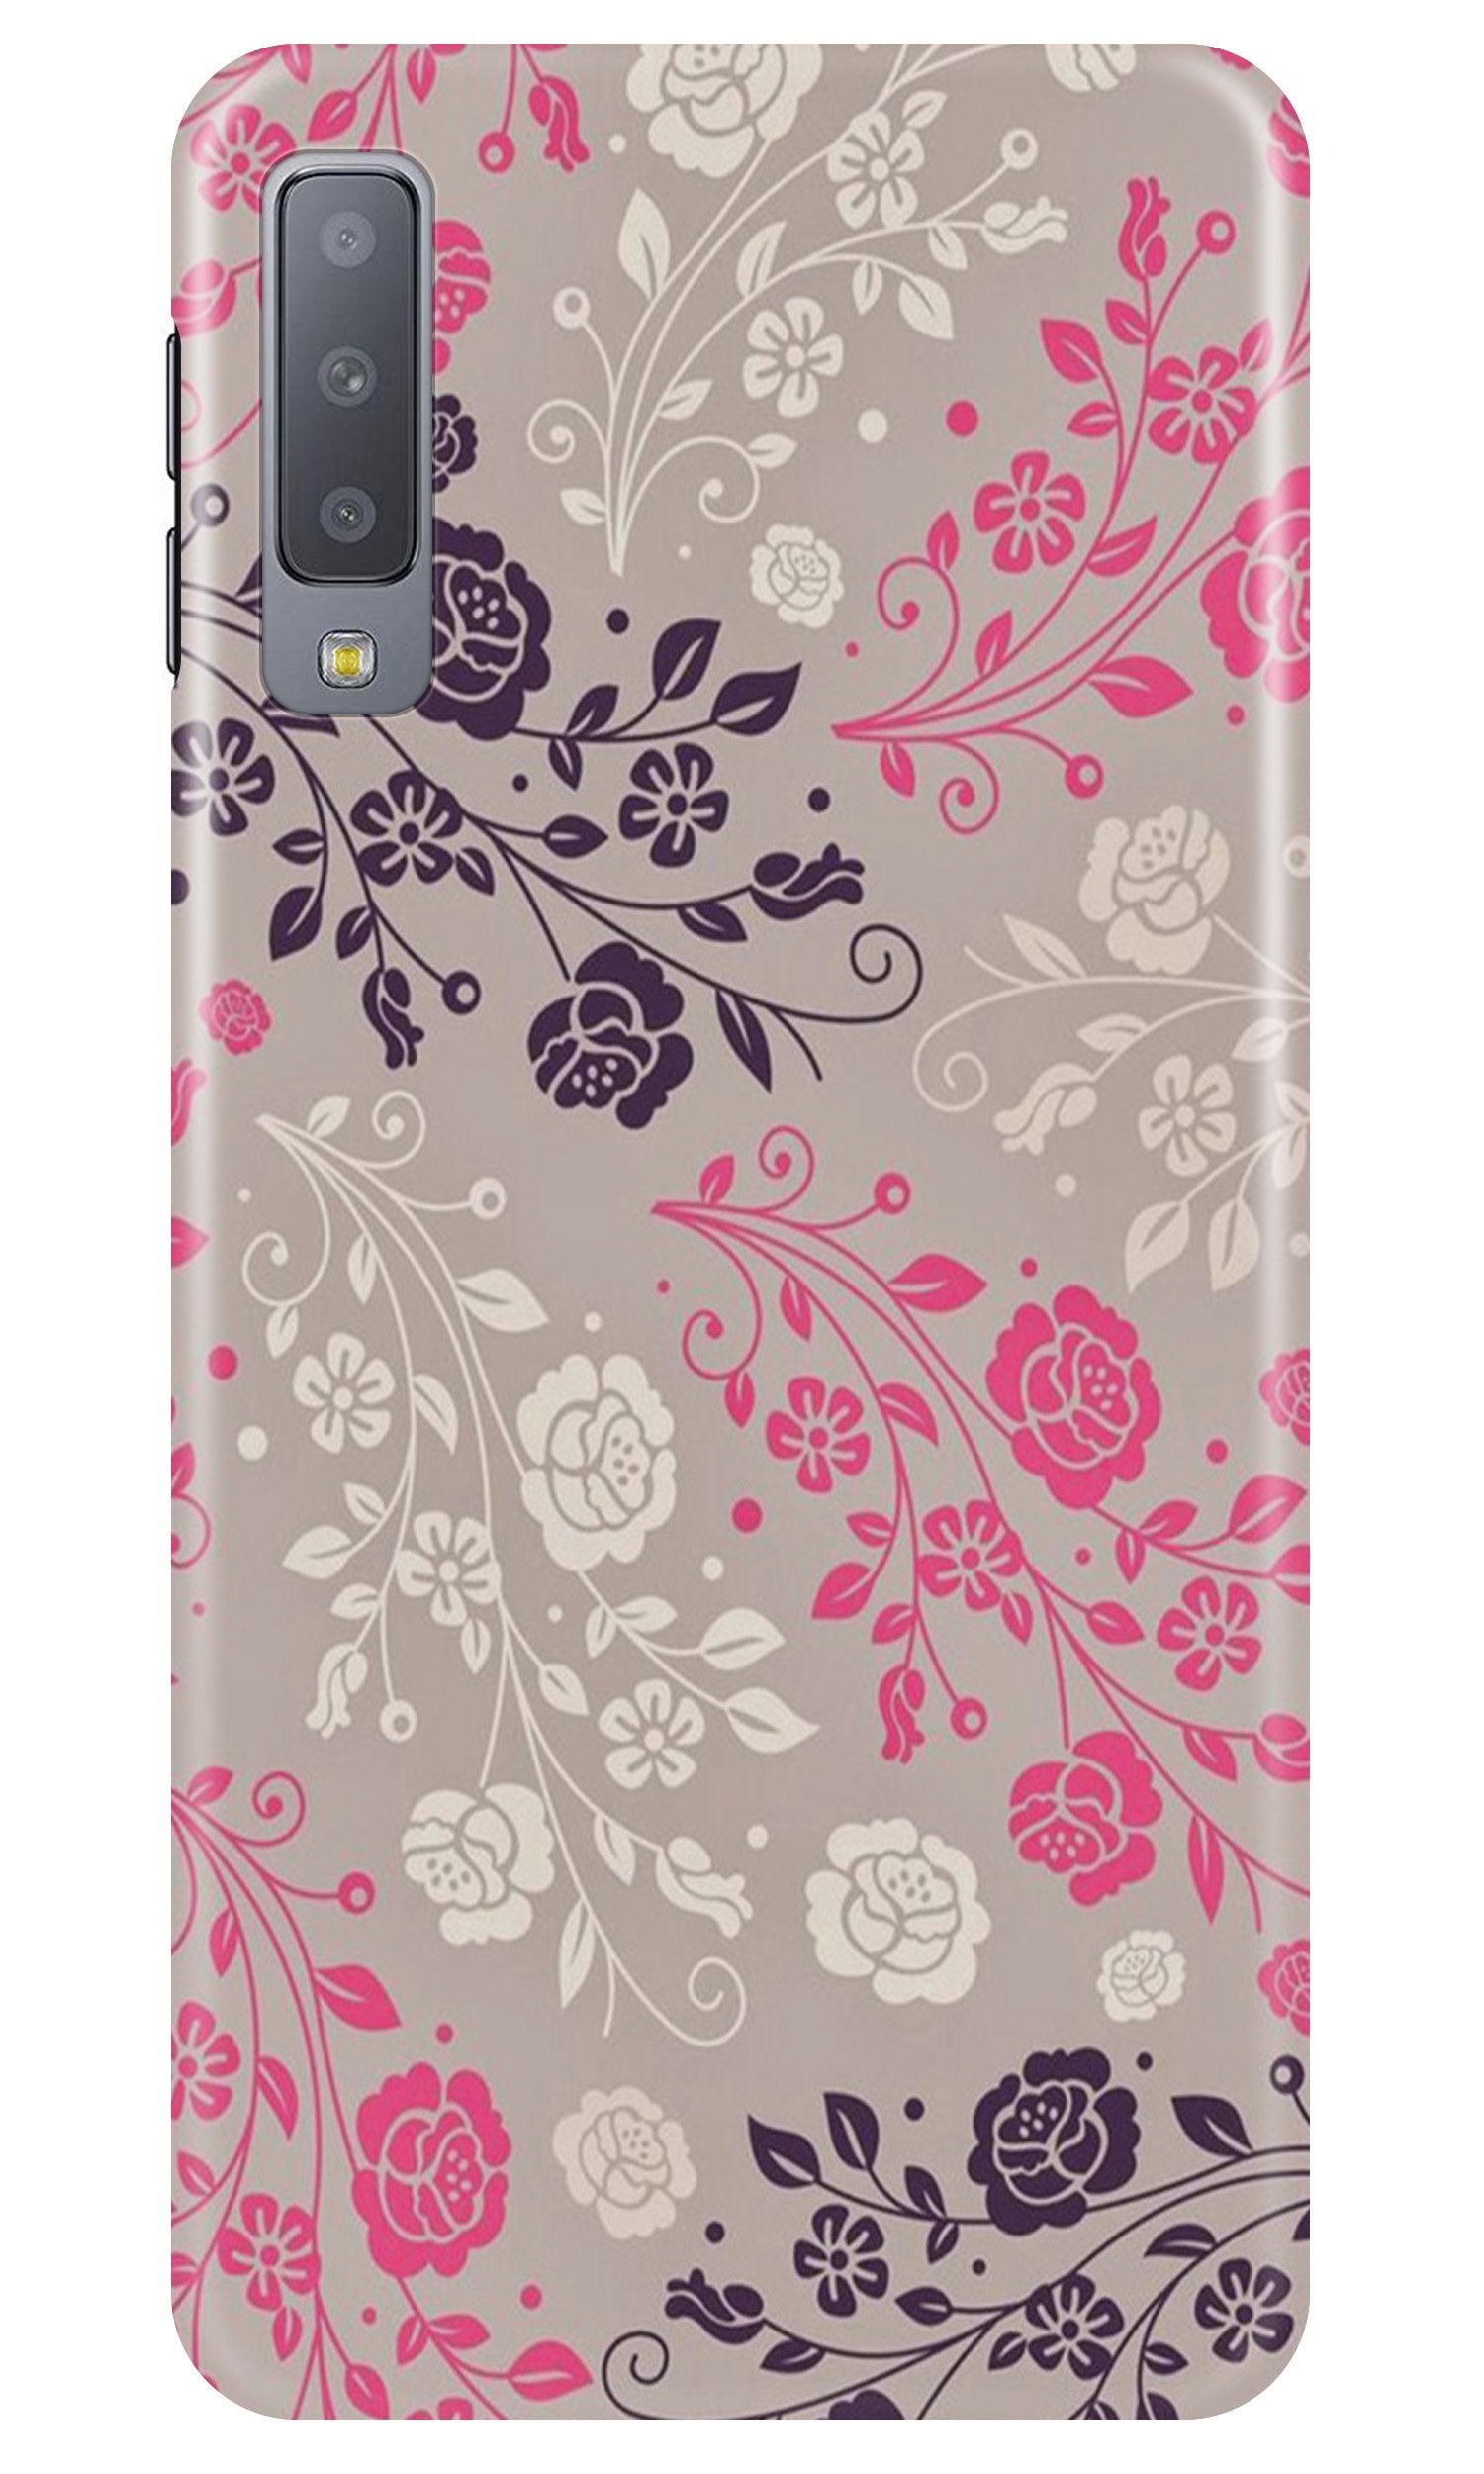 Pattern2 Case for Samsung Galaxy A50s